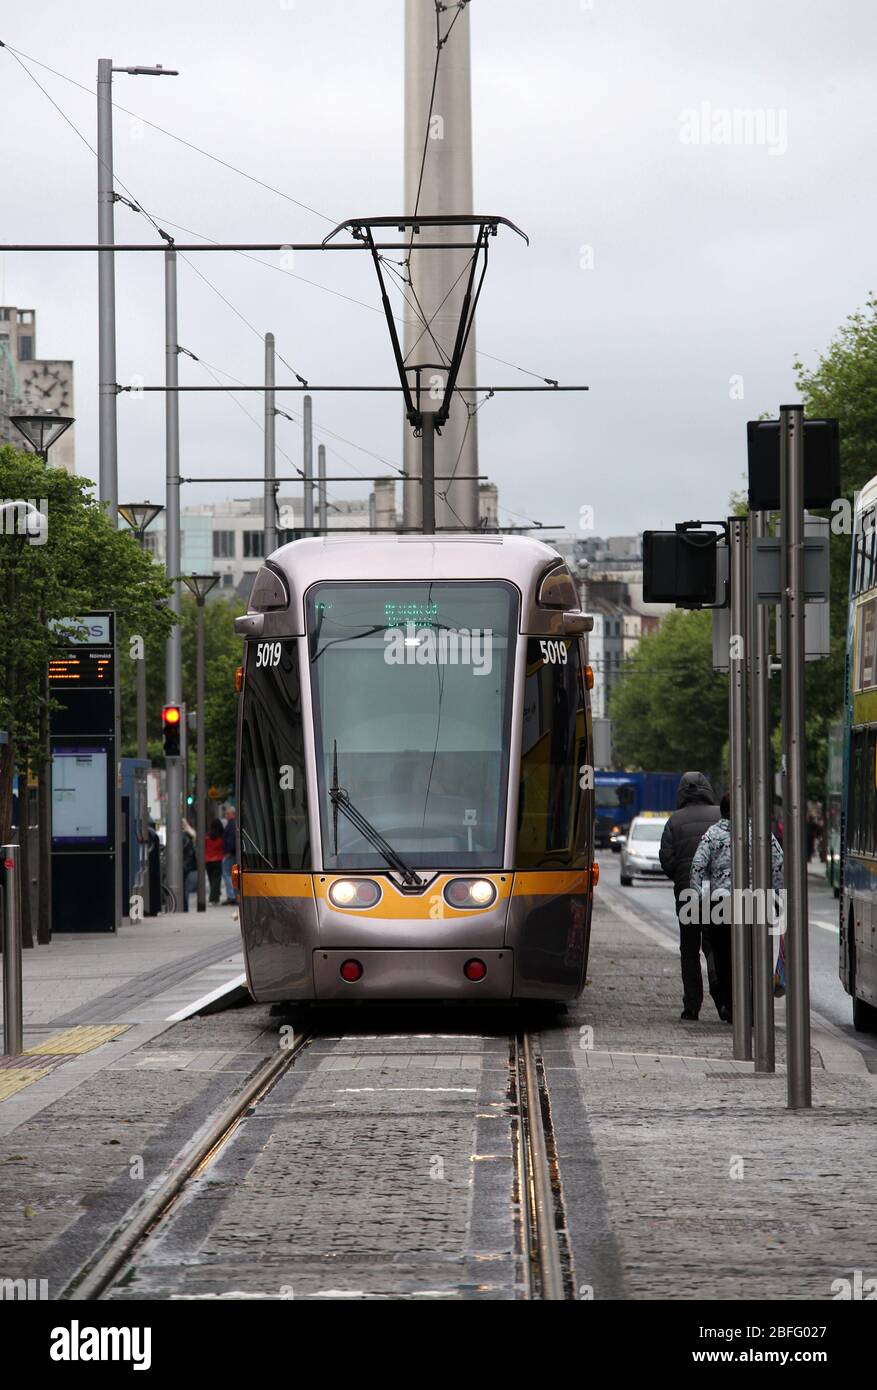 Luas light rail system in the city centre of Dublin Stock Photo